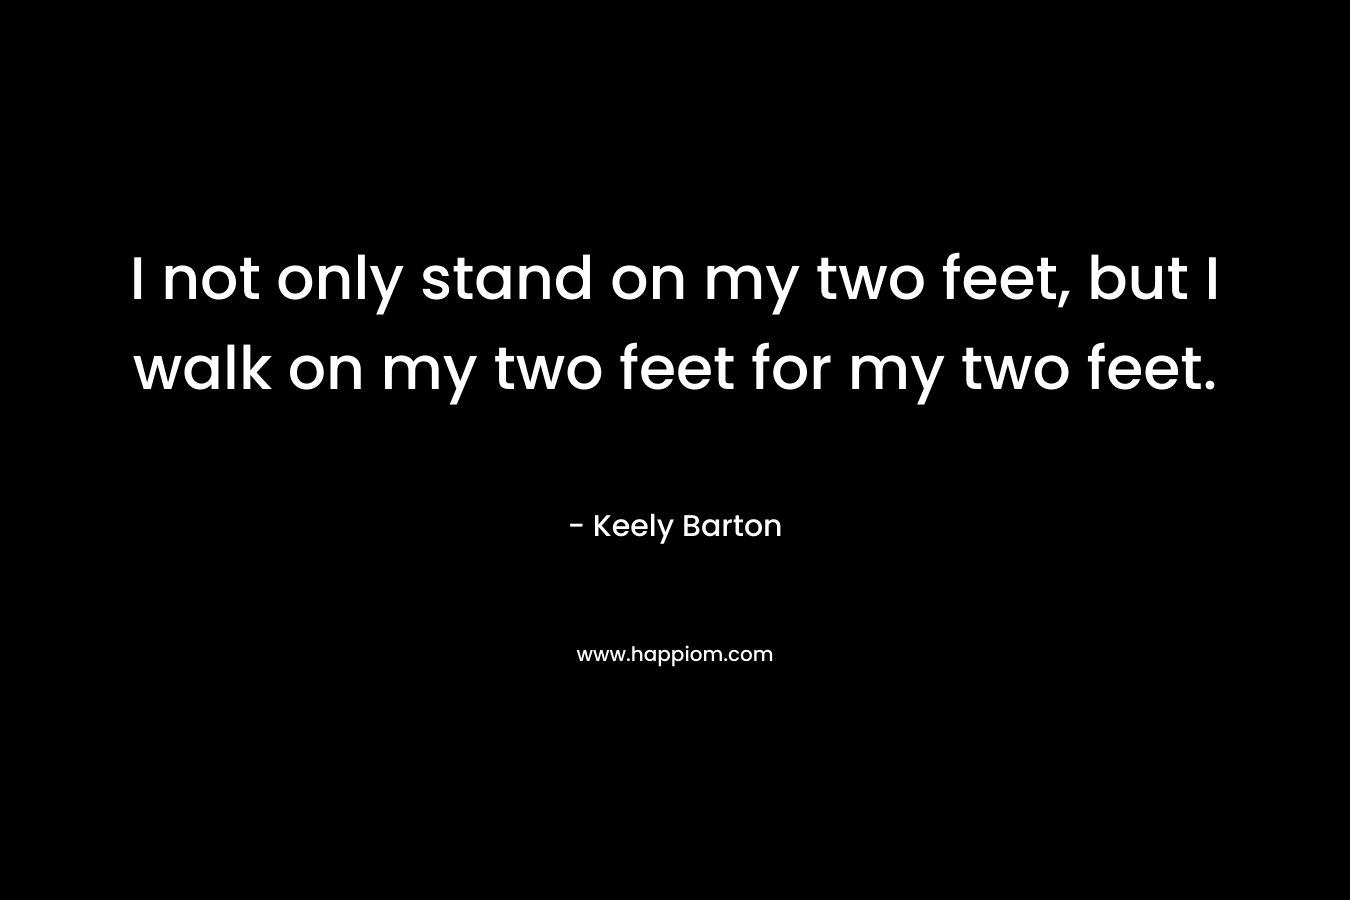 I not only stand on my two feet, but I walk on my two feet for my two feet.